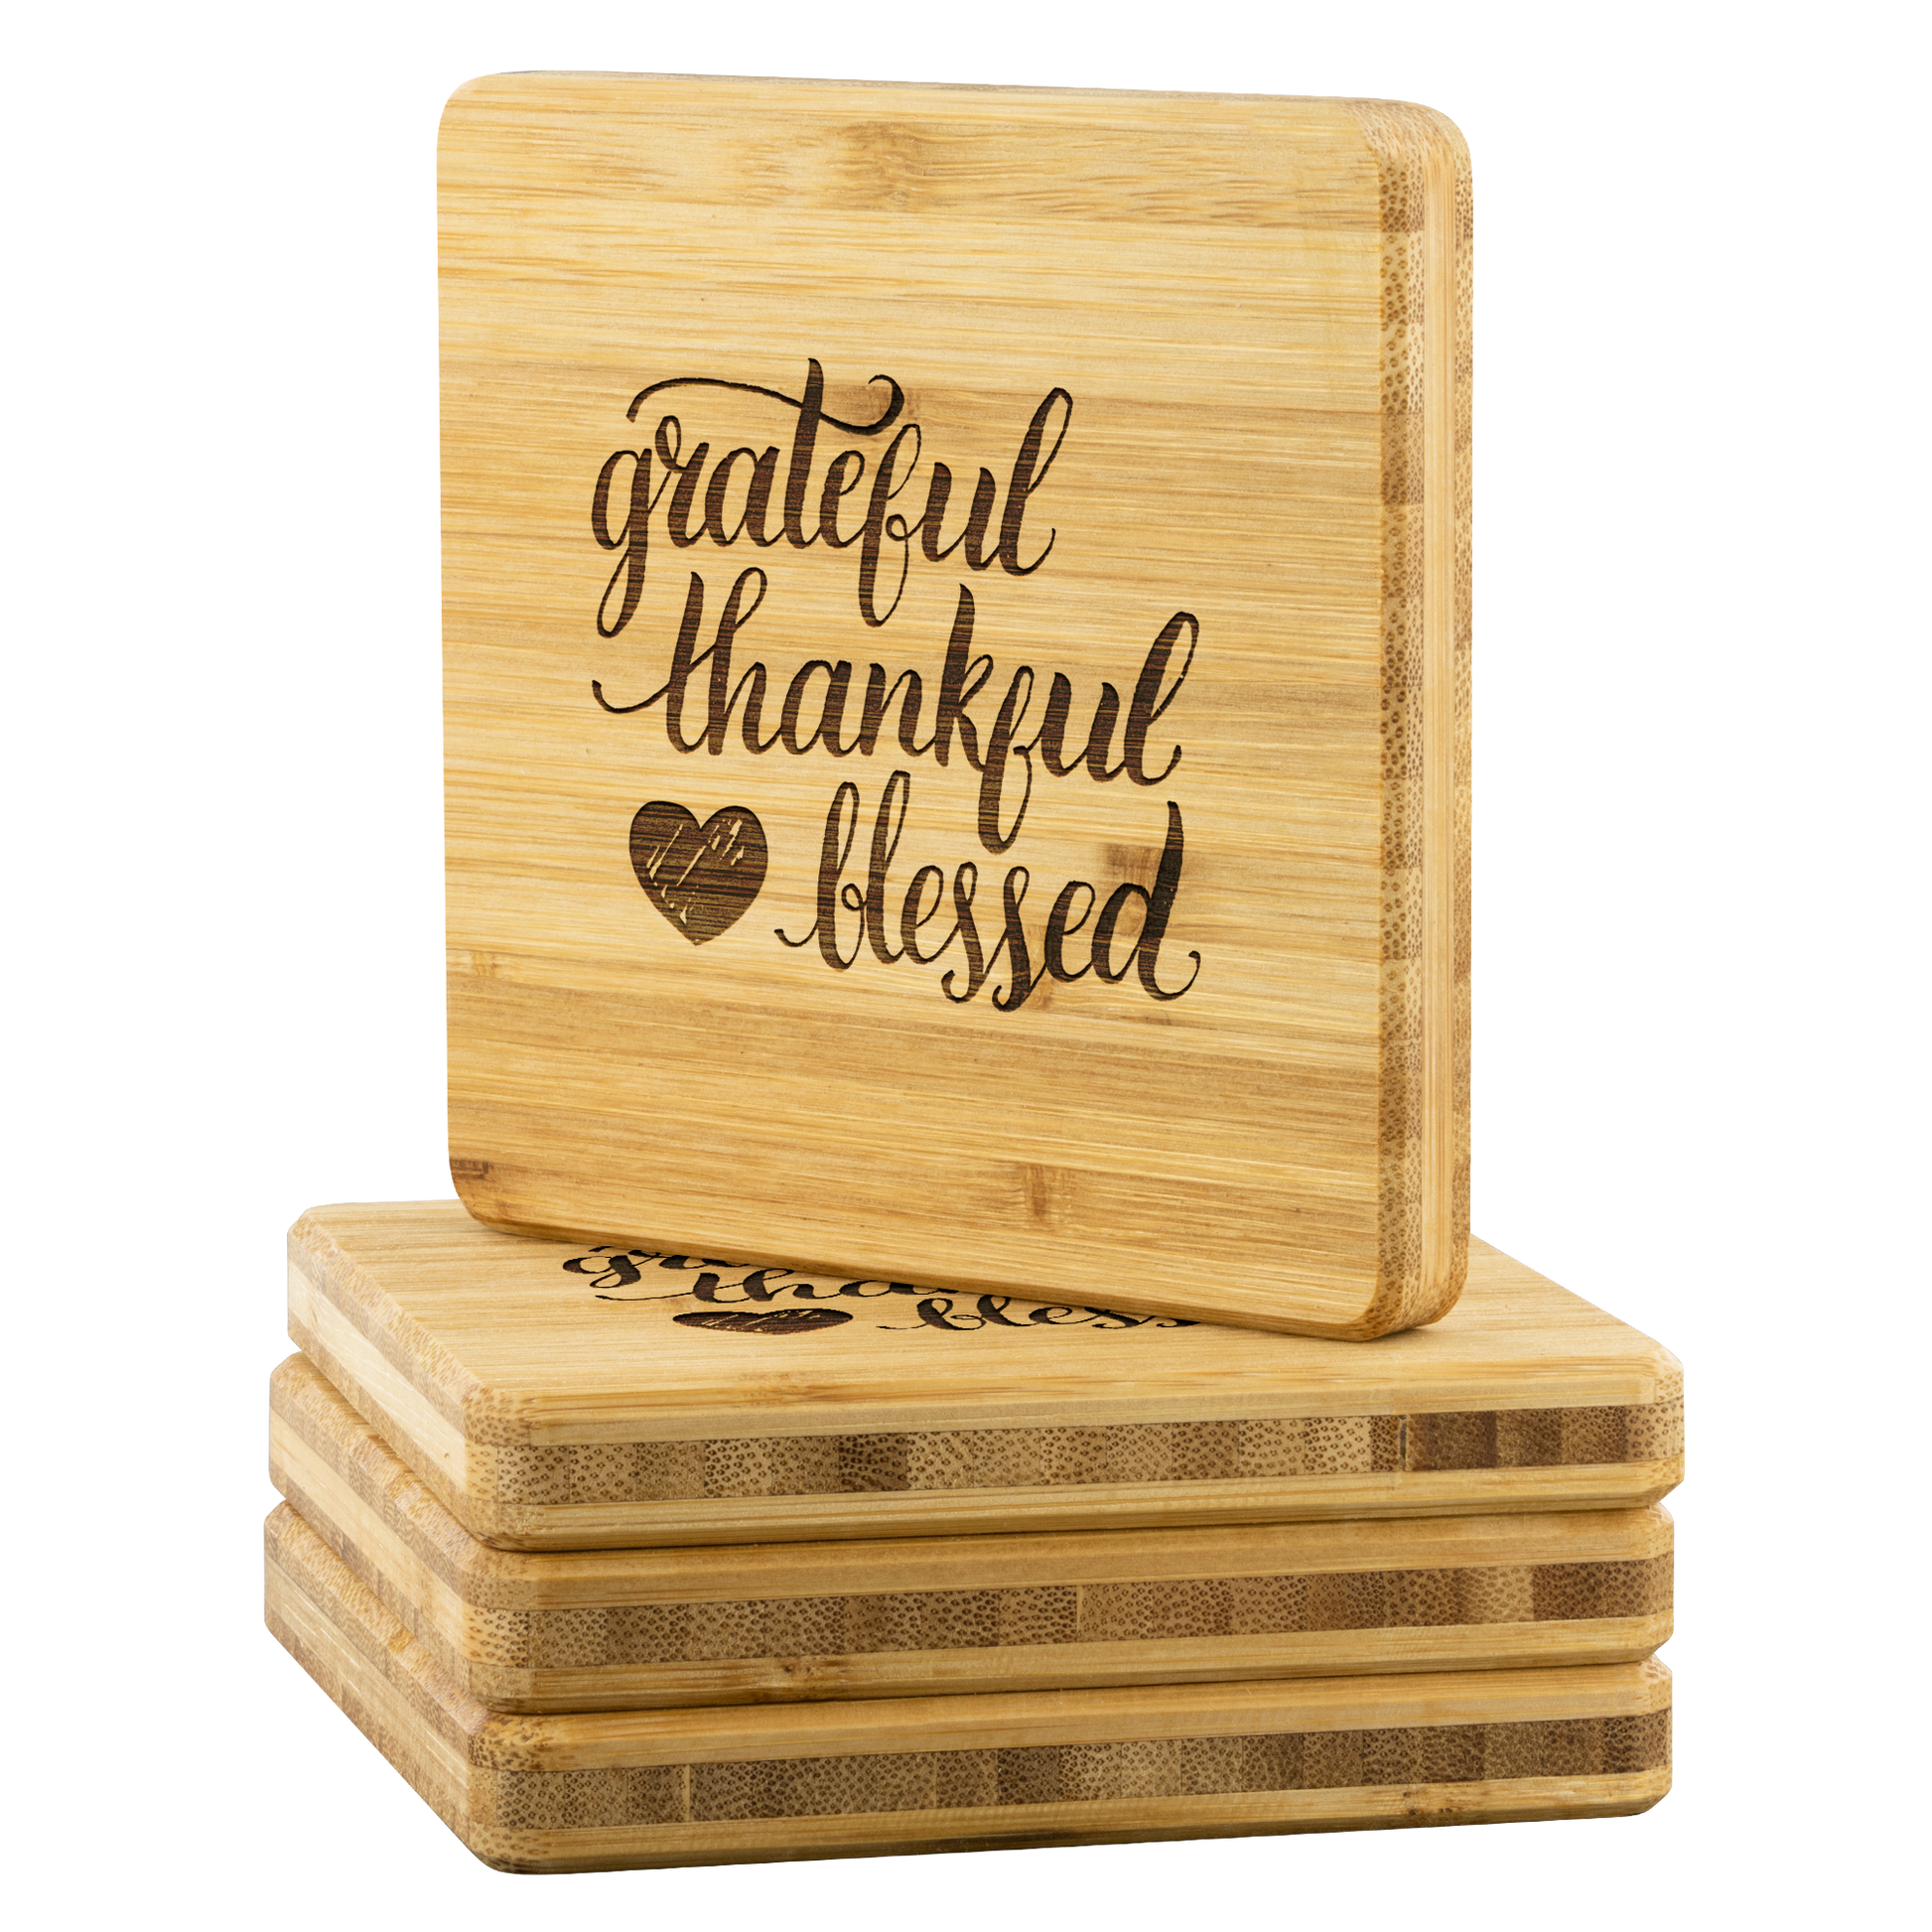 Grateful - Thankful - Blessed - Bamboo Coasters stack